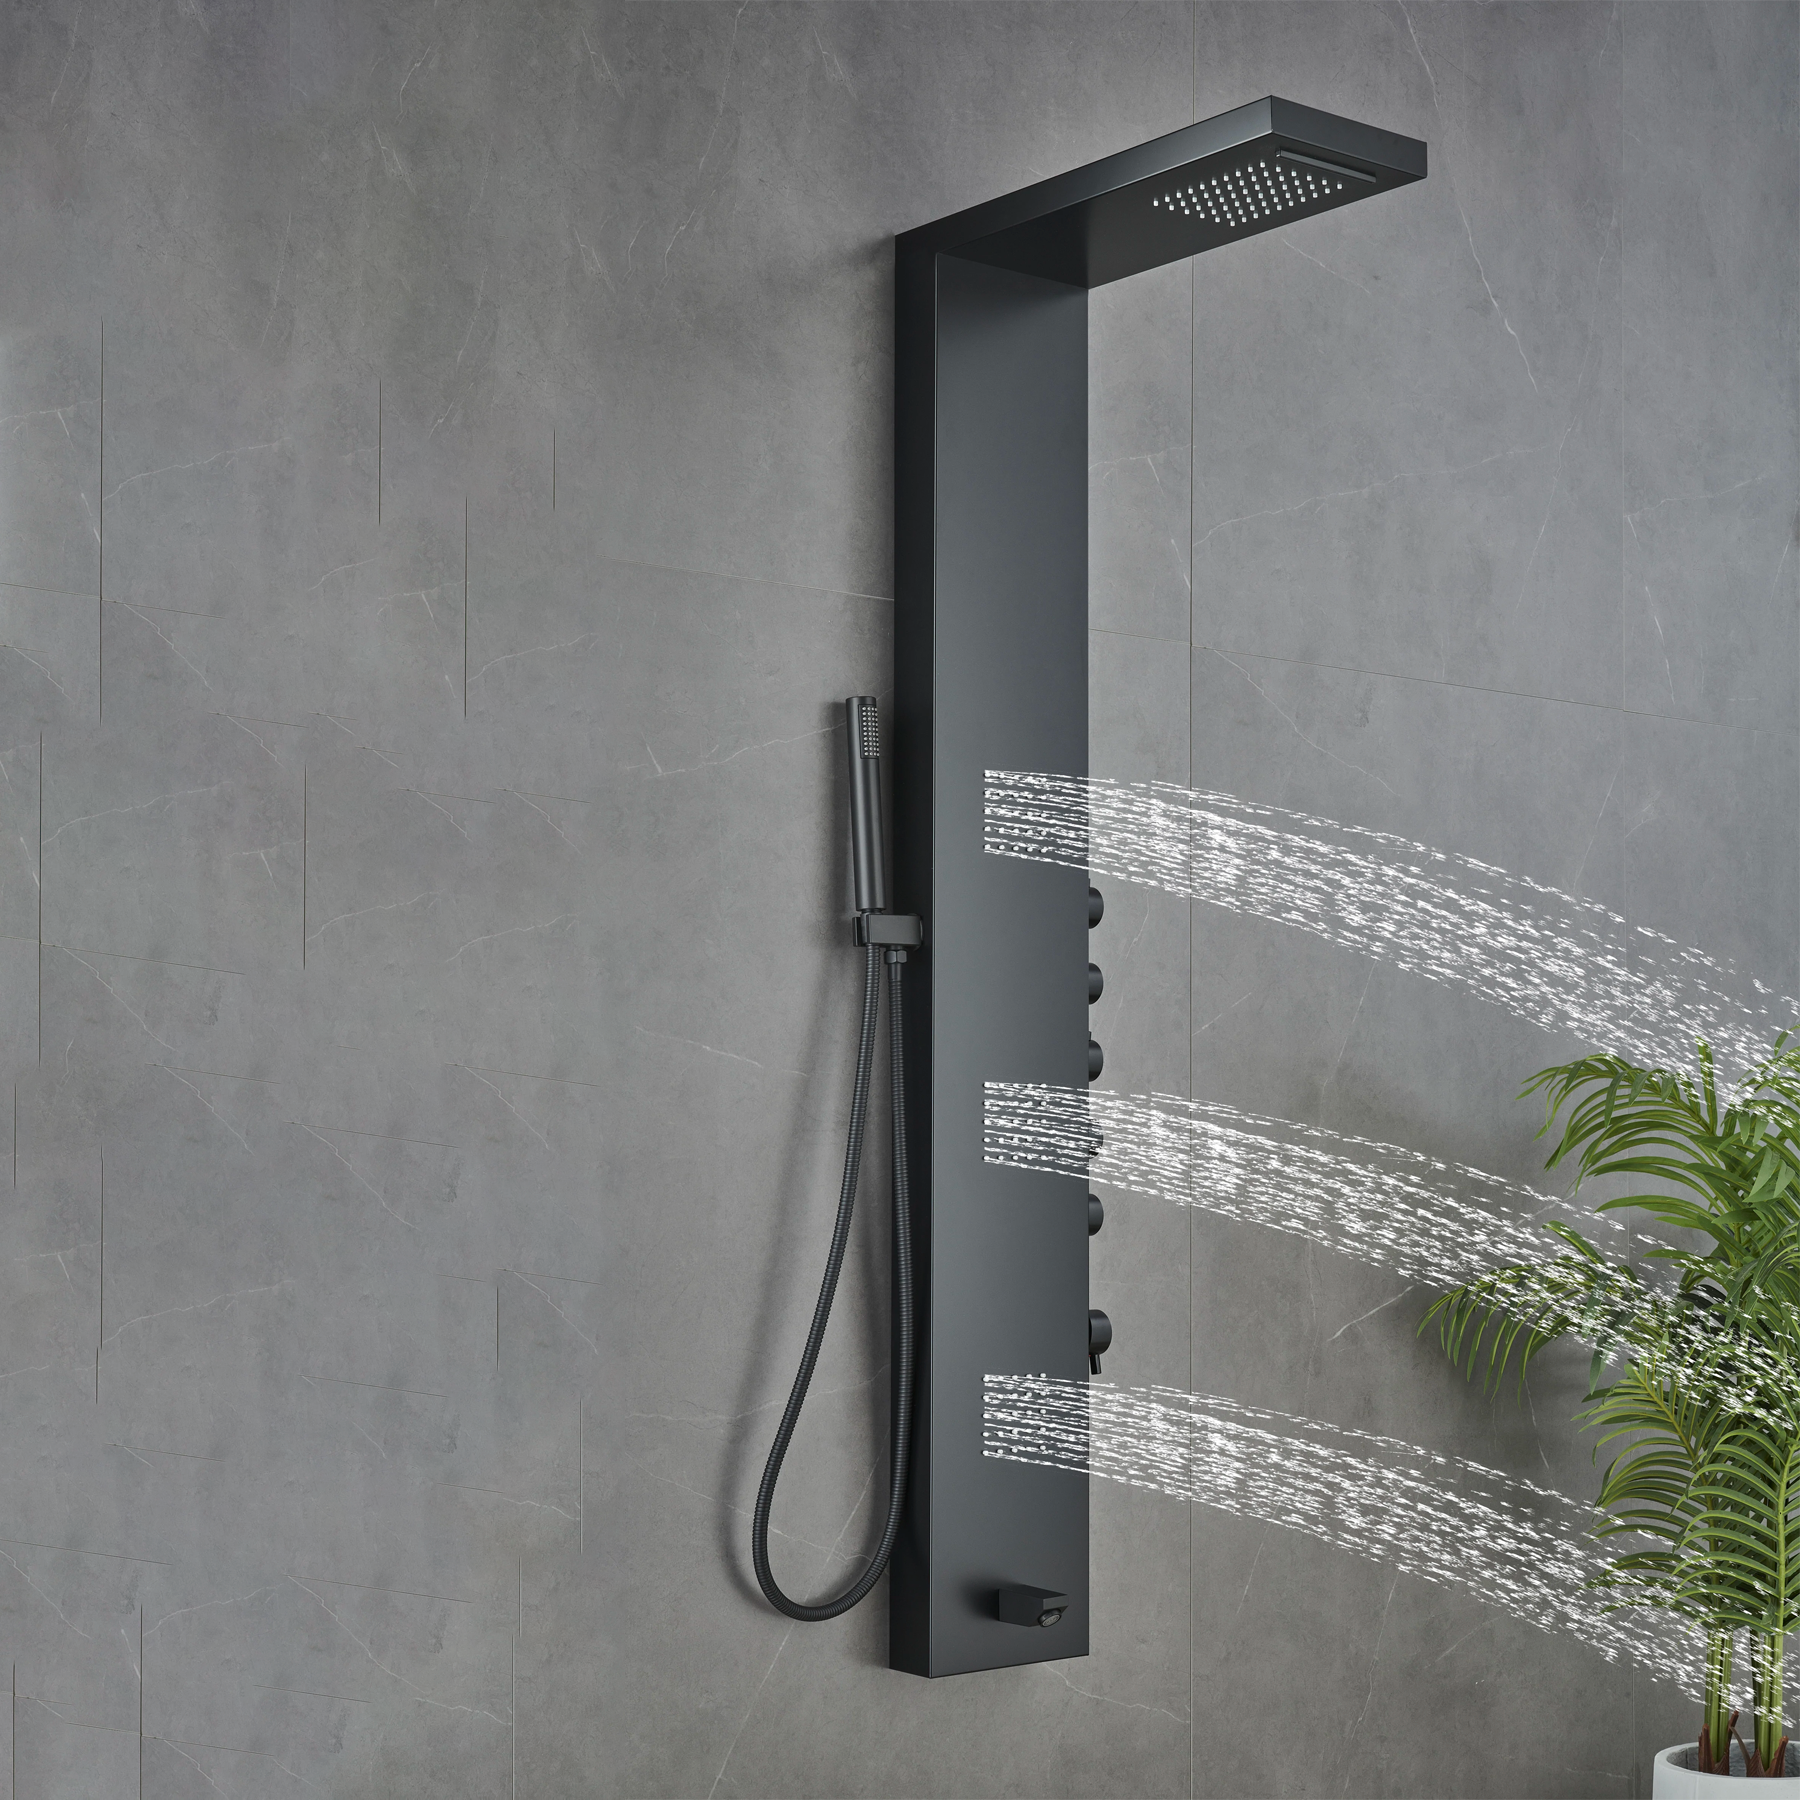 55 inch 3- Jet Stainless Steel Shower Panel System with Rainfall, Waterfall Shower Head, Tub Spout & Handheld Shower - Matte Black Finish